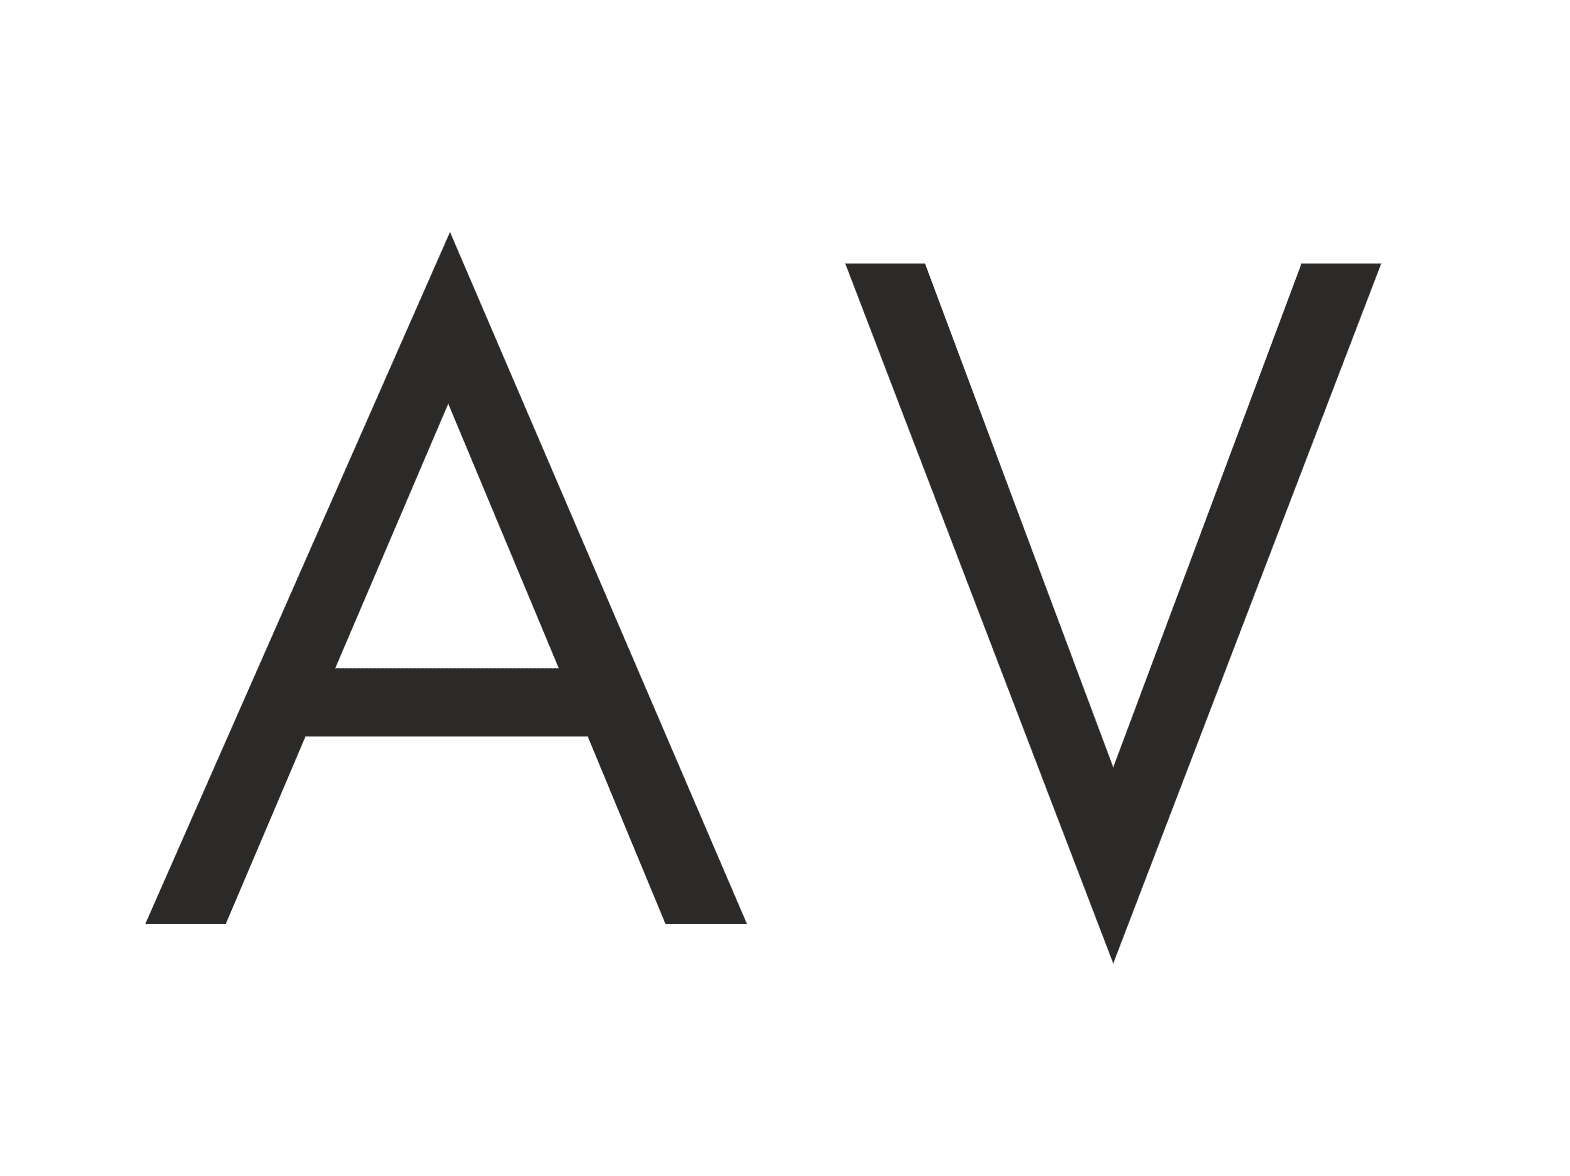 The Stylized "A" and "V" that make up the Arri Visuals Logo